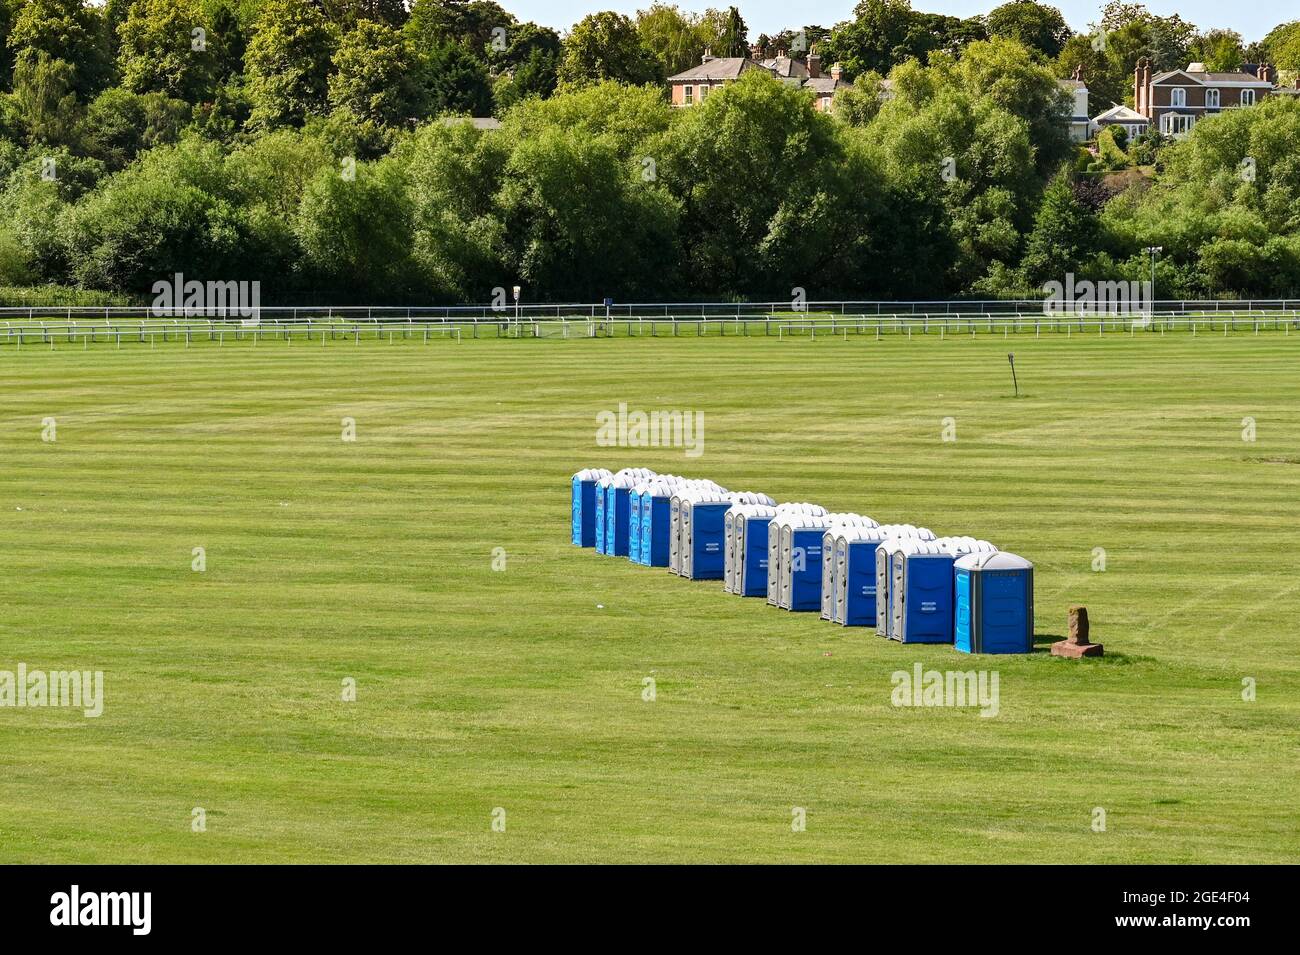 Chester, Cheshire, England - July 2021: Row of portable toilets on the racecourse in preparation for an event Stock Photo